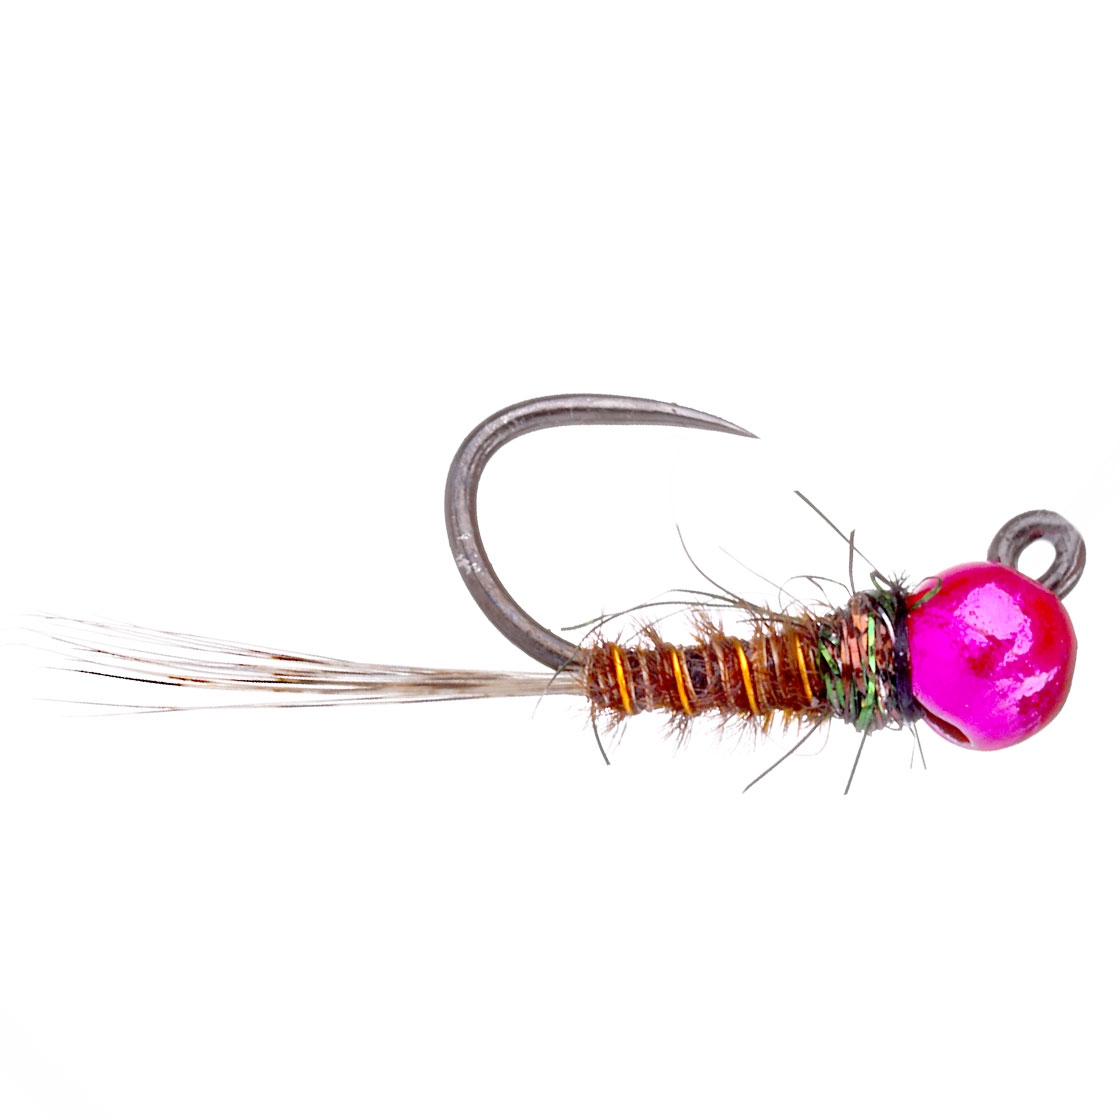 adh-fishing Nymph - Grayling Special Jig, Jig and Competition